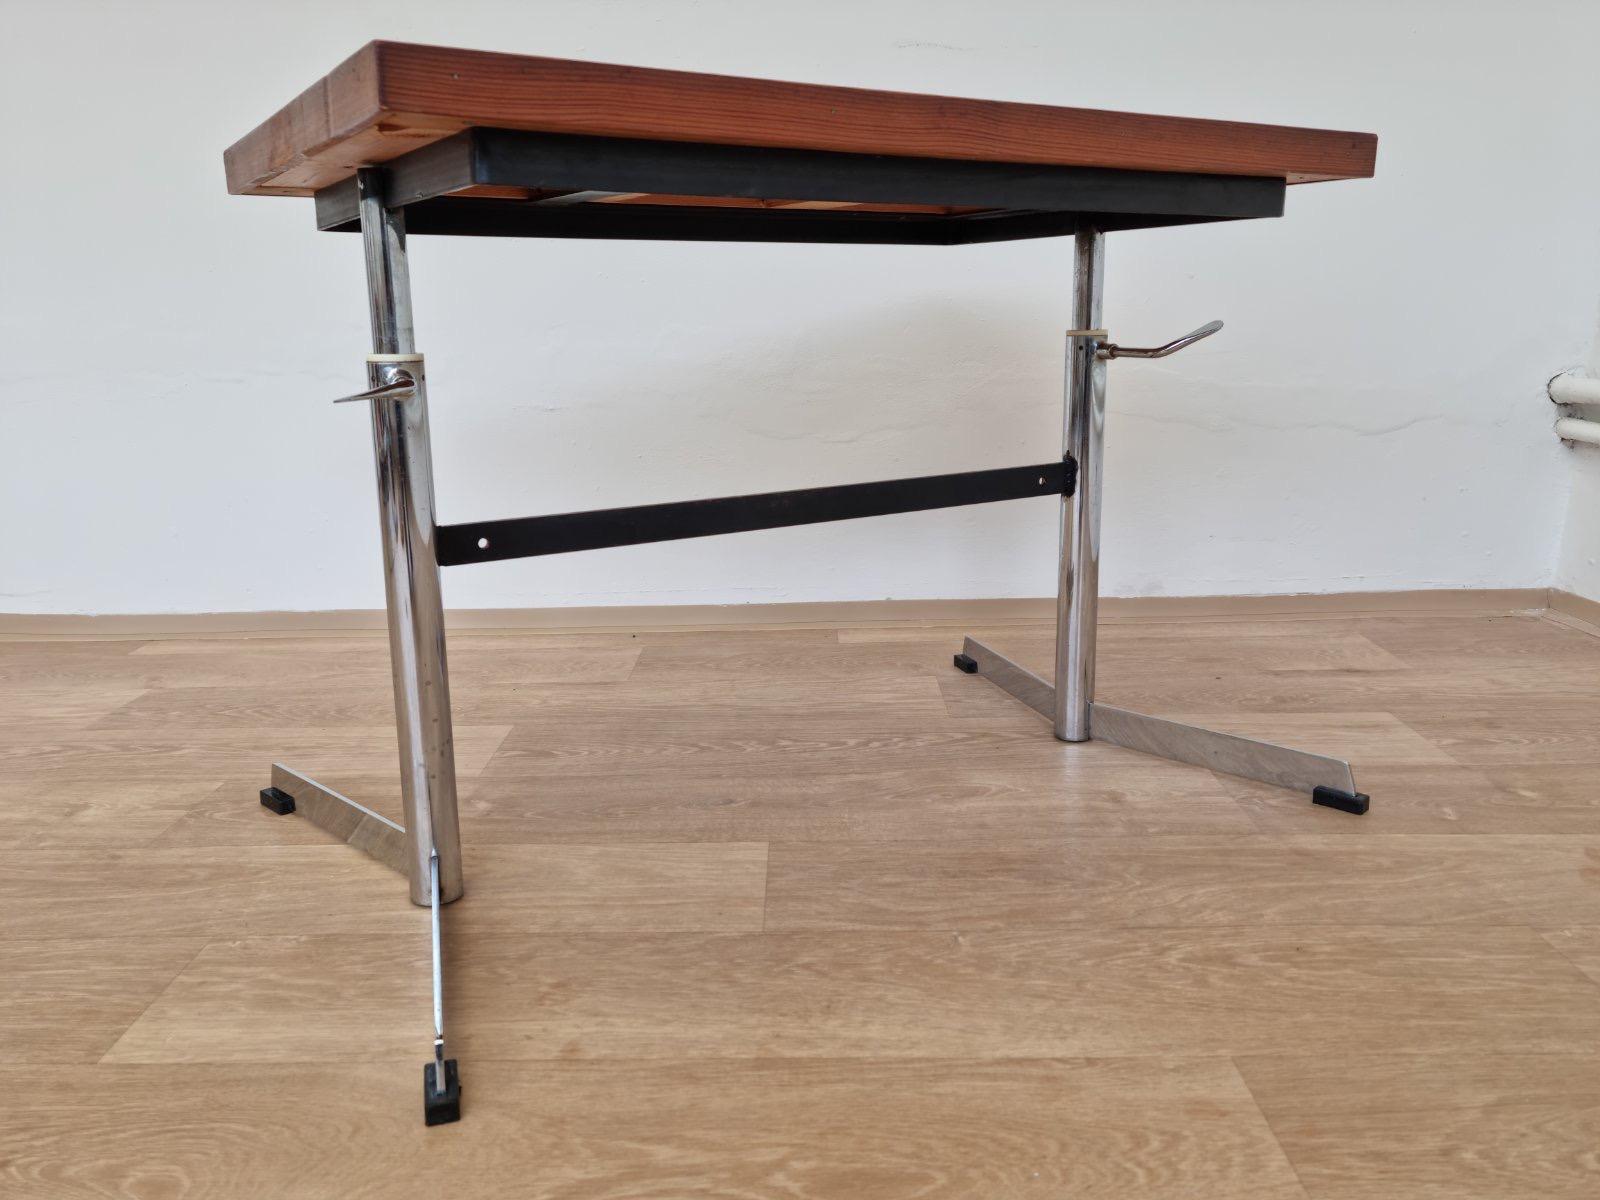 Midcentury Design Adjustable Table, 1970s / Czechoslovakia In Good Condition For Sale In Praha, CZ